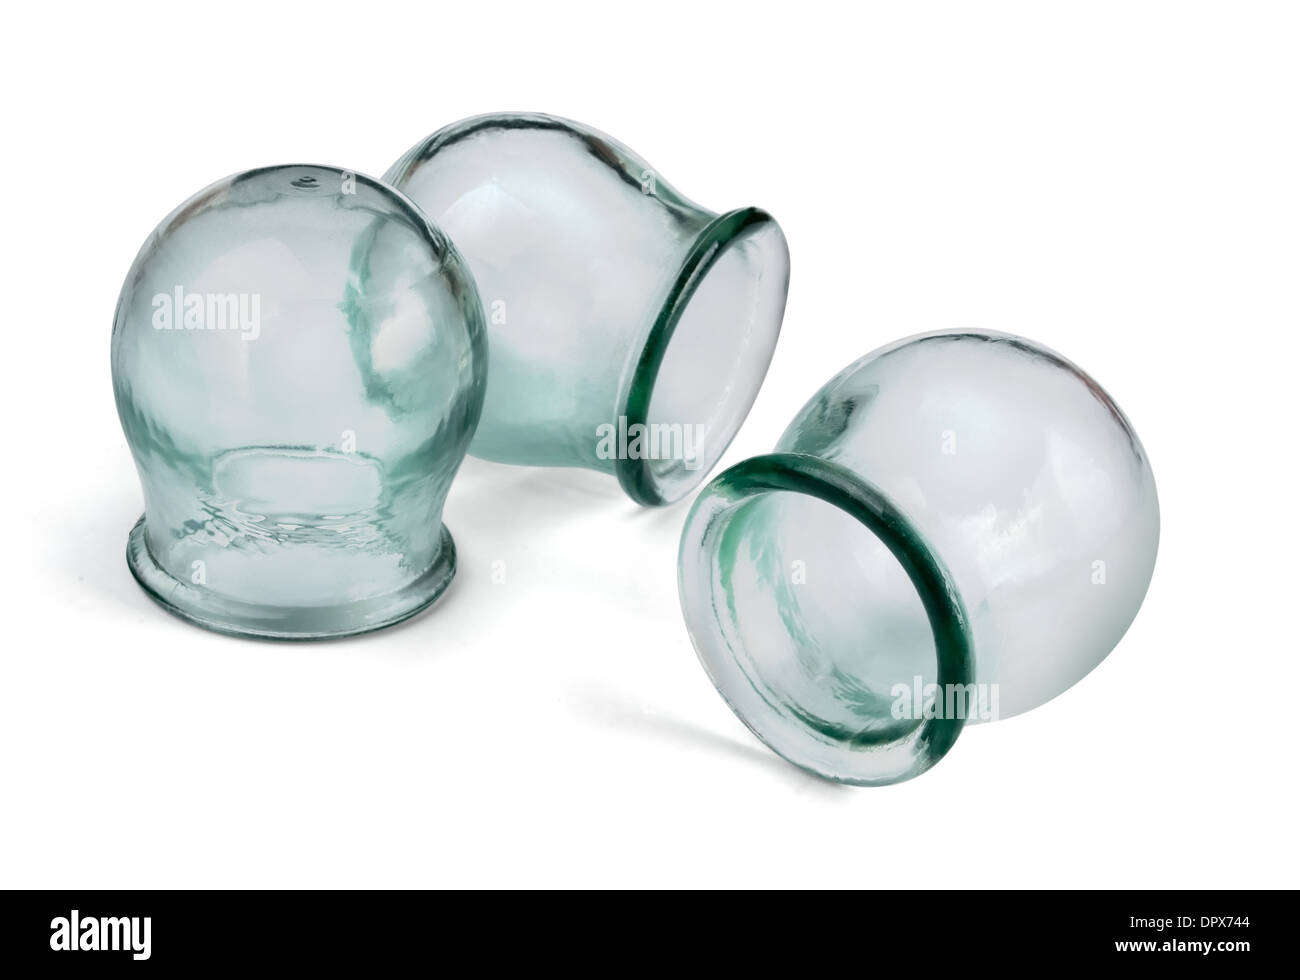 Medical cupping glass isolated on white Stock Photo